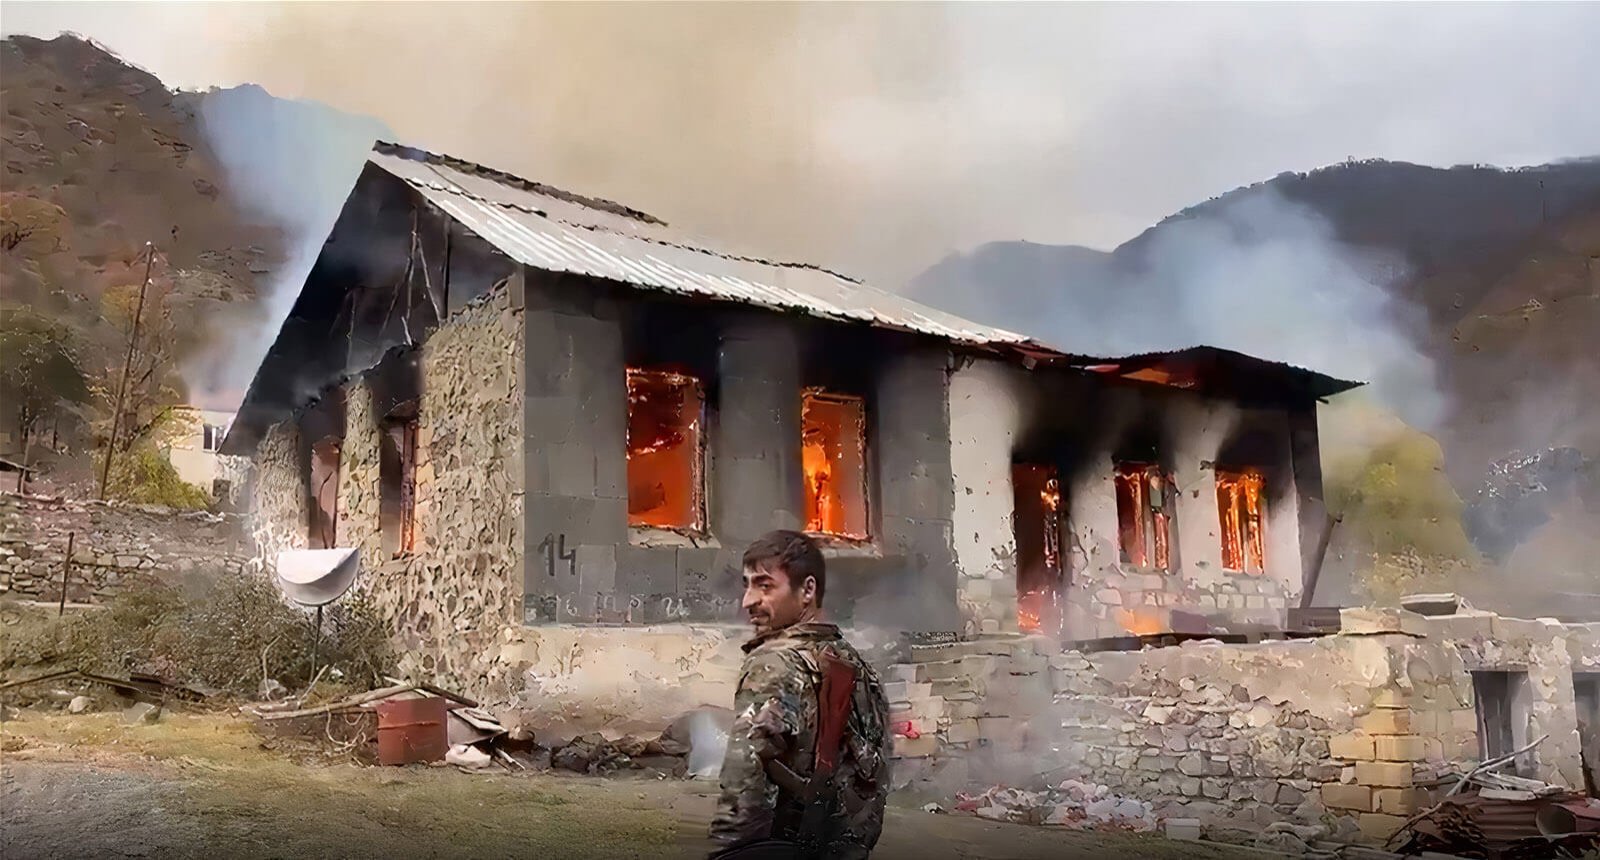 Residents of Armenian territories set fire to homes and move graves to avoid vandalism by Azerbaijan forces after land swap in a Russia-brokered peace deal